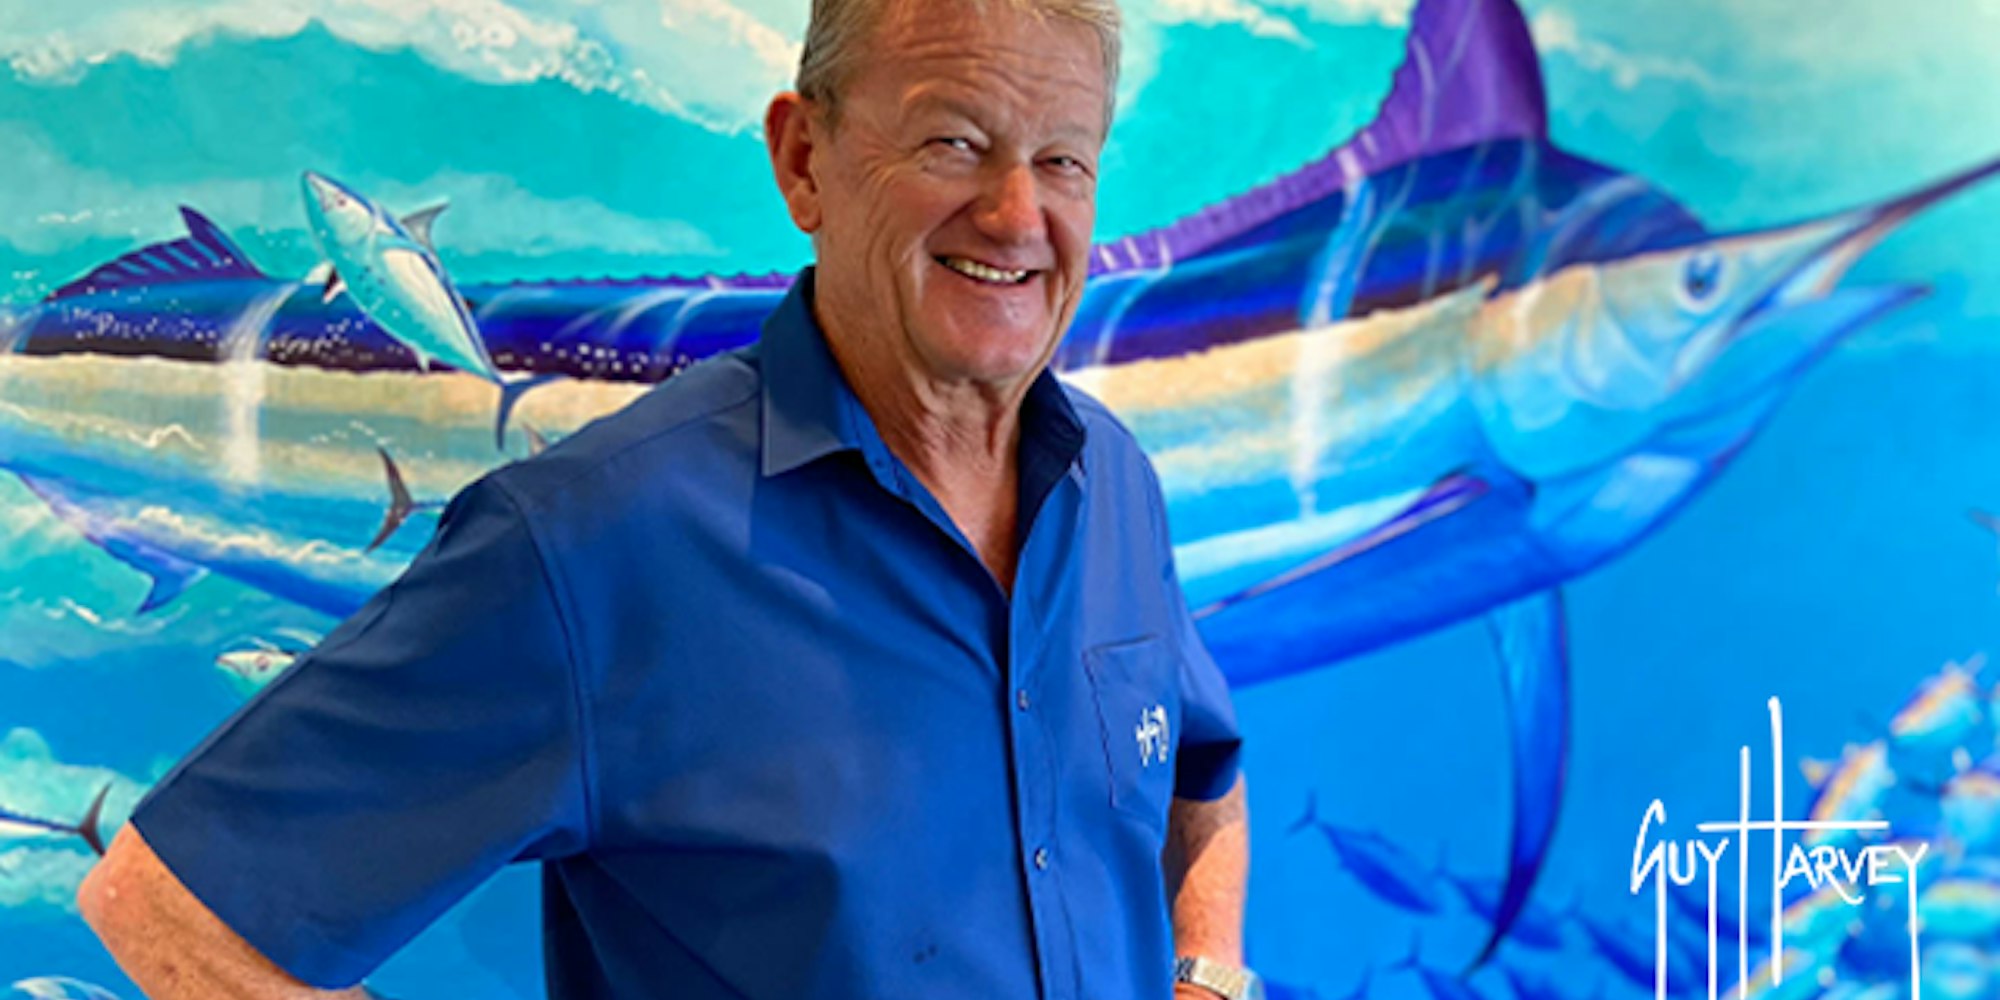 Cover Image for Guy Harvey Weekend at SeaWorld Orlando